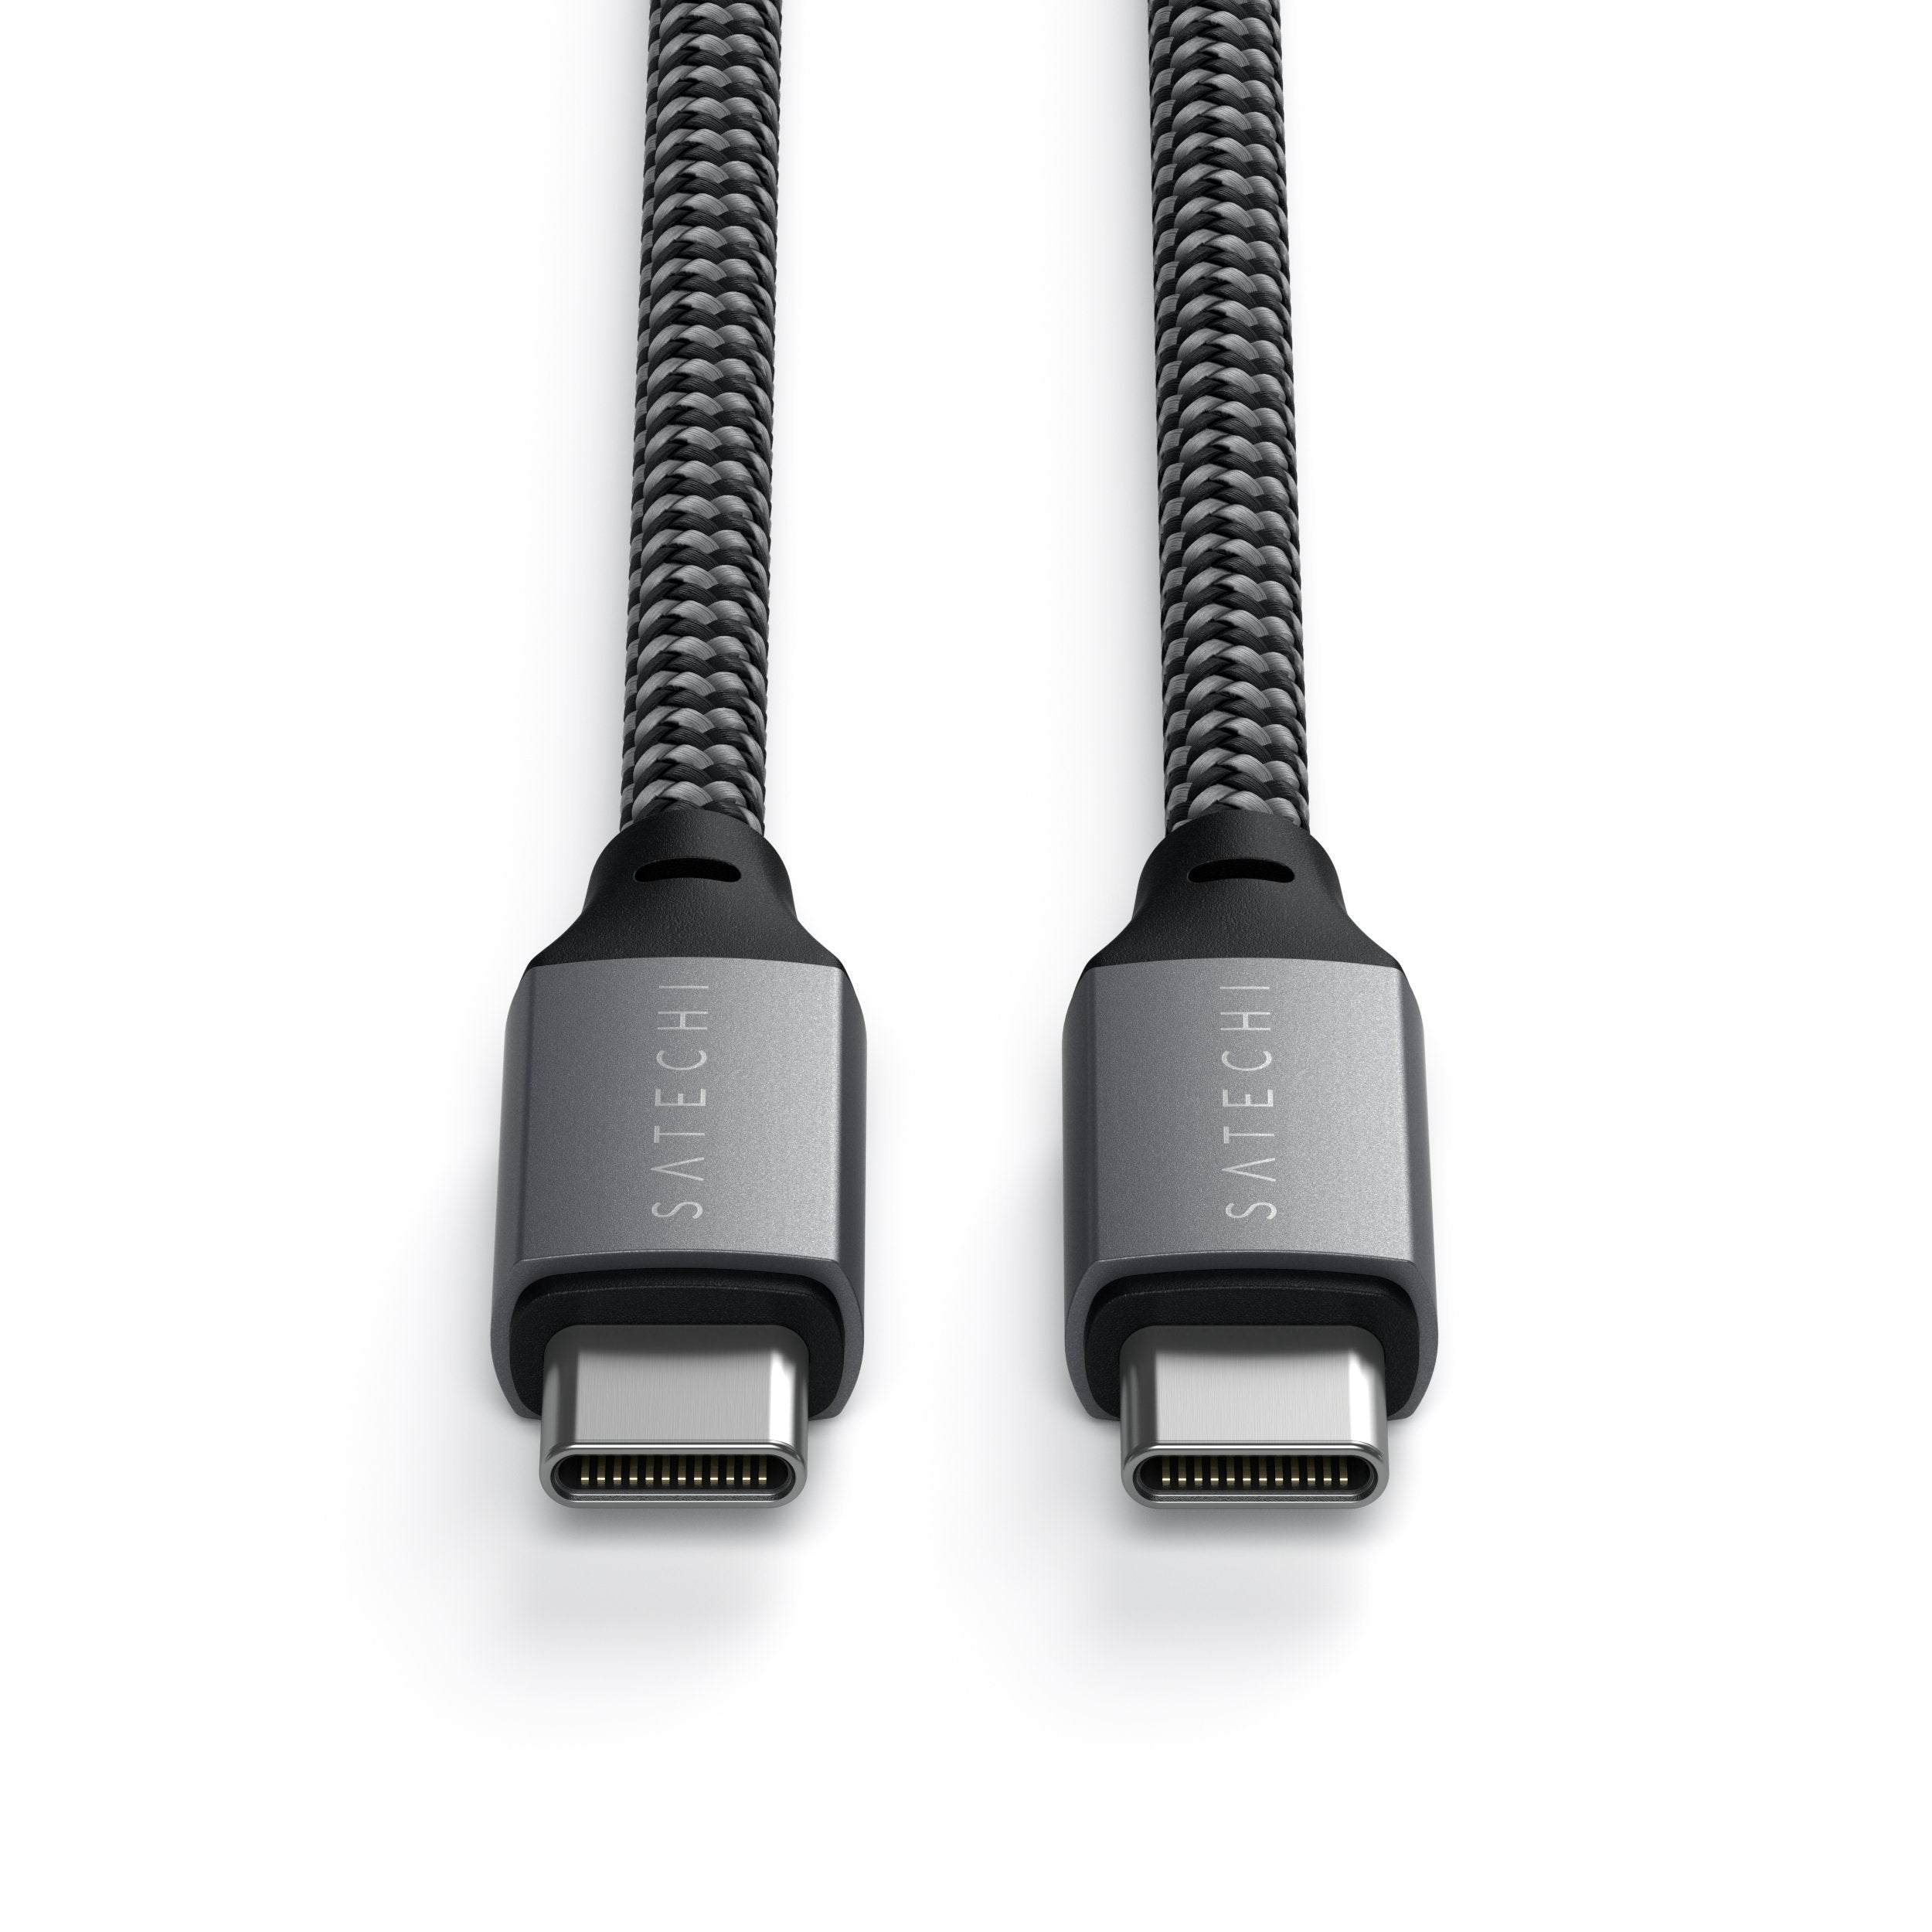 USB-C to USB-C 100W Charging Cable - Satechi